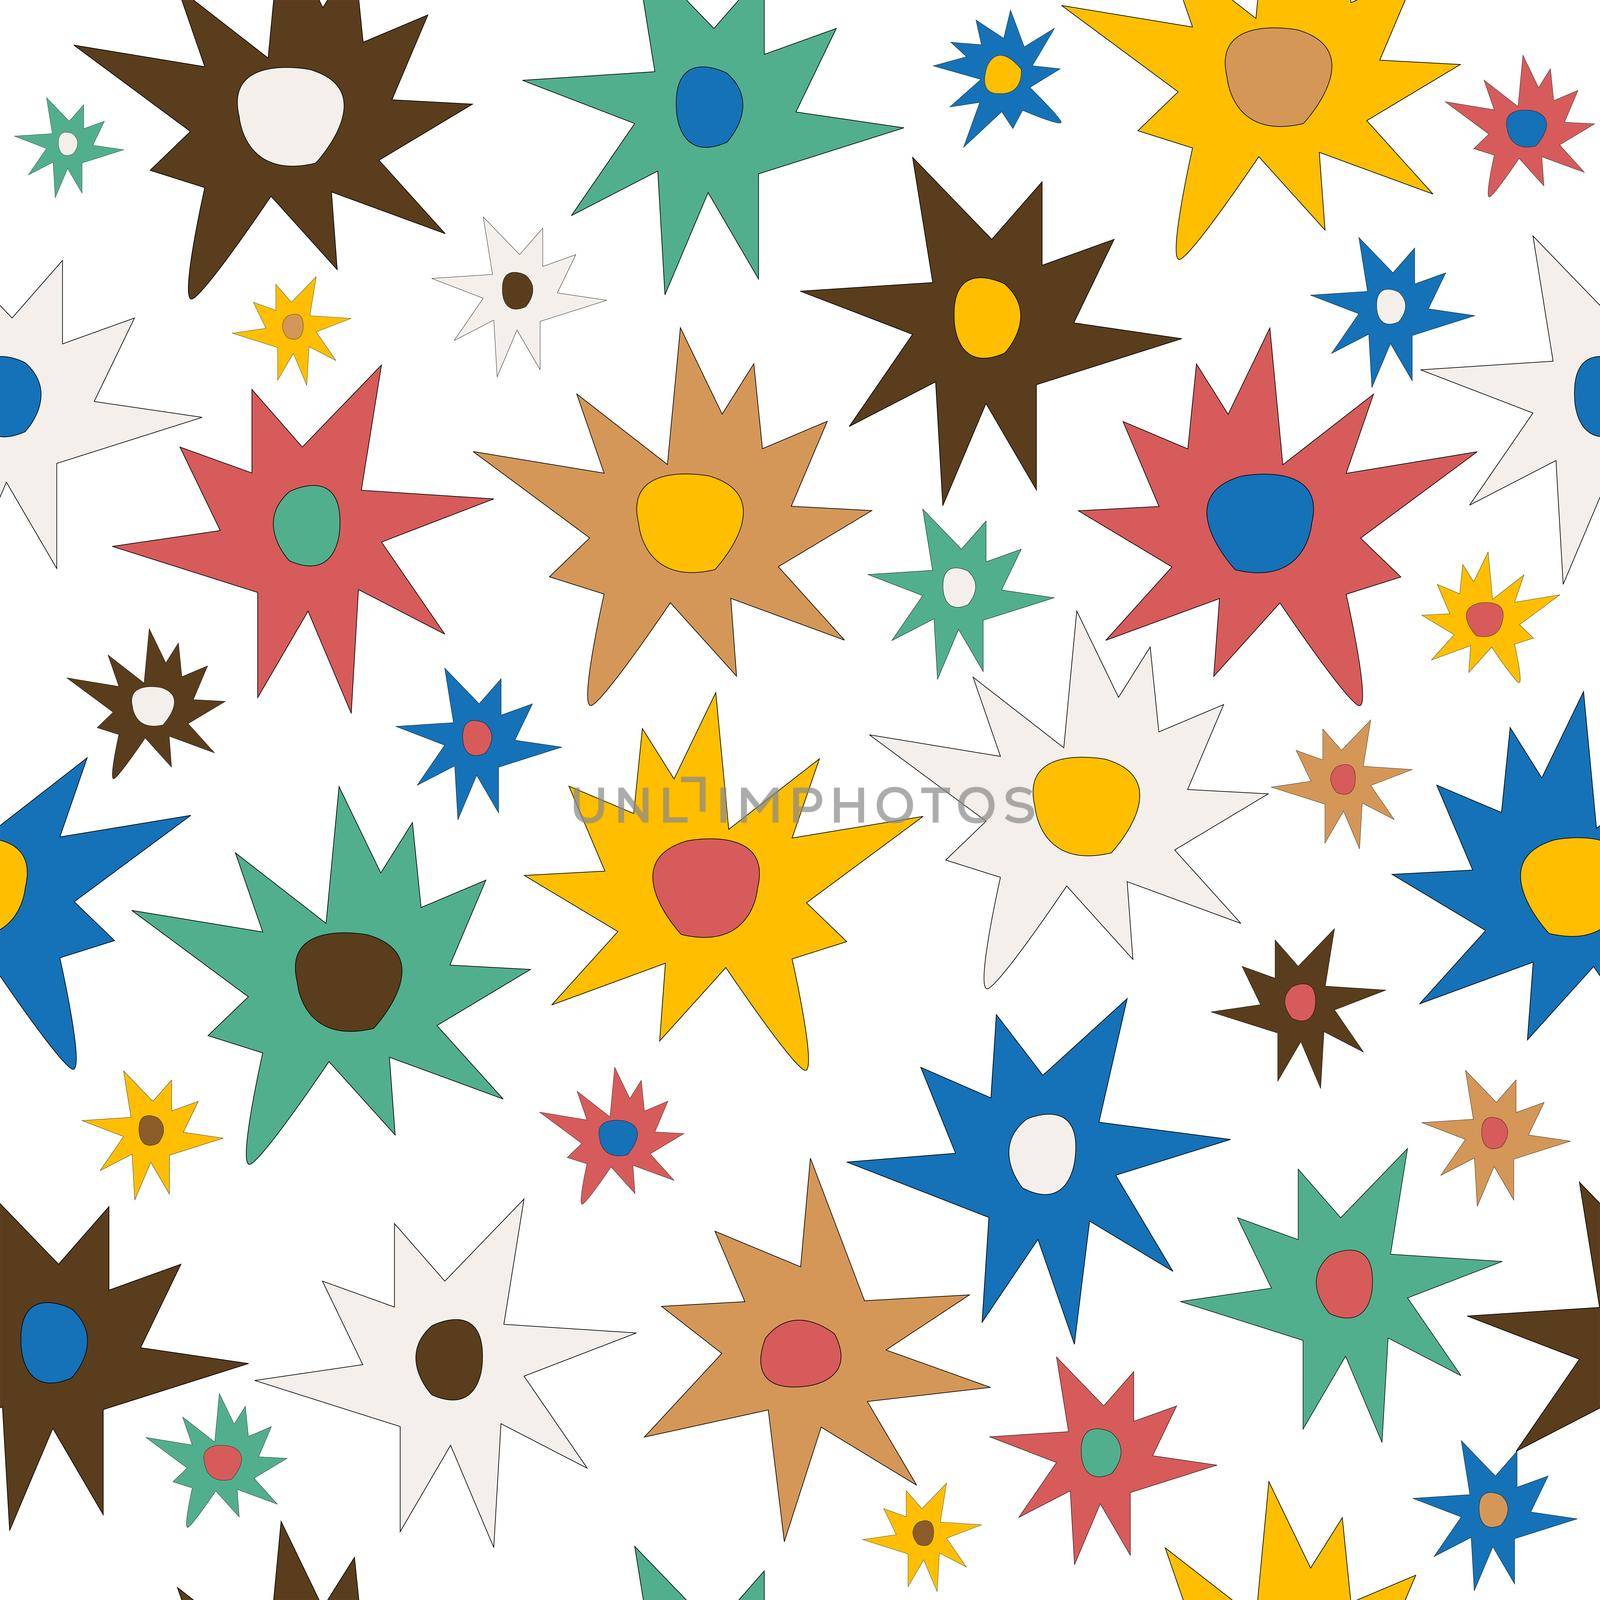 Doodle stars colored seamless background by hibrida13